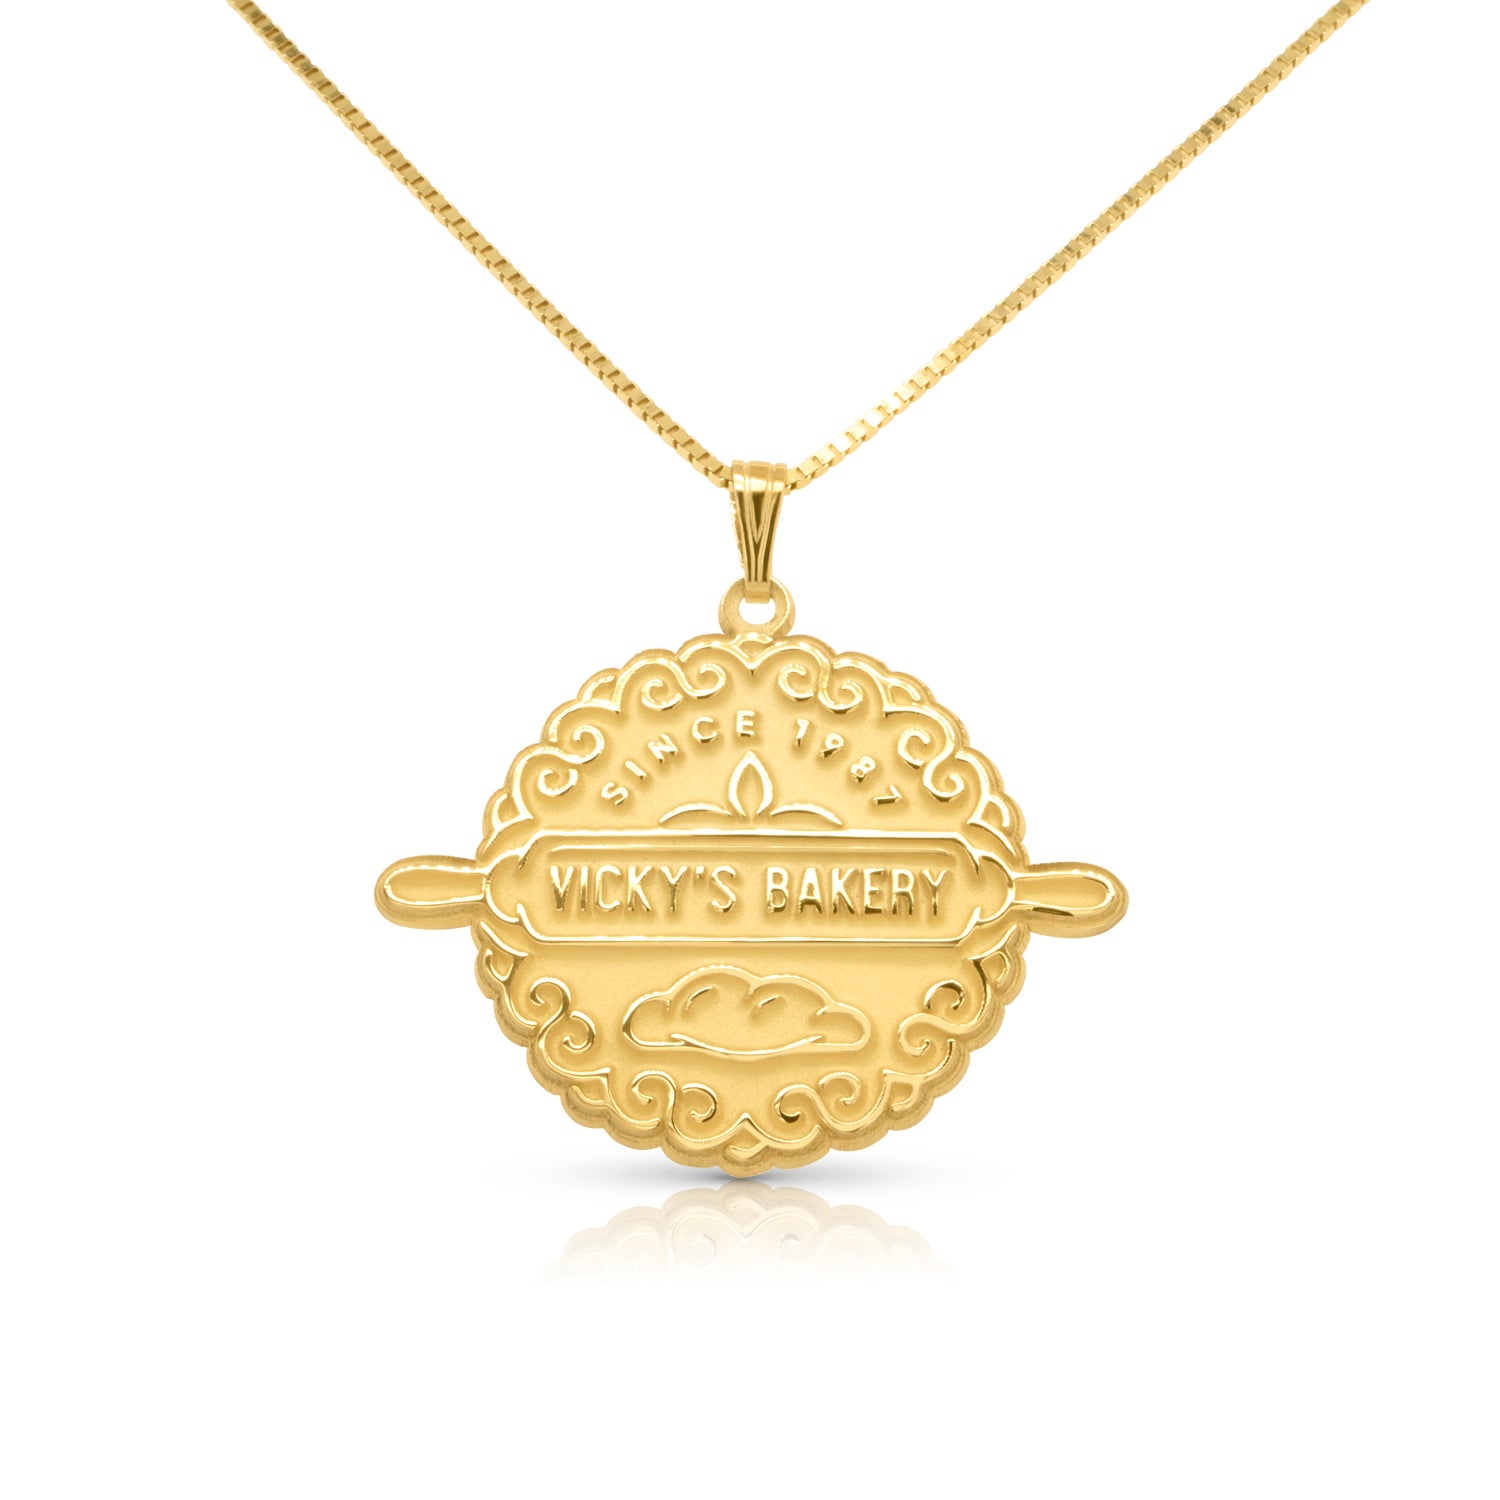 Gold round pendant with an engraved store name on a white background